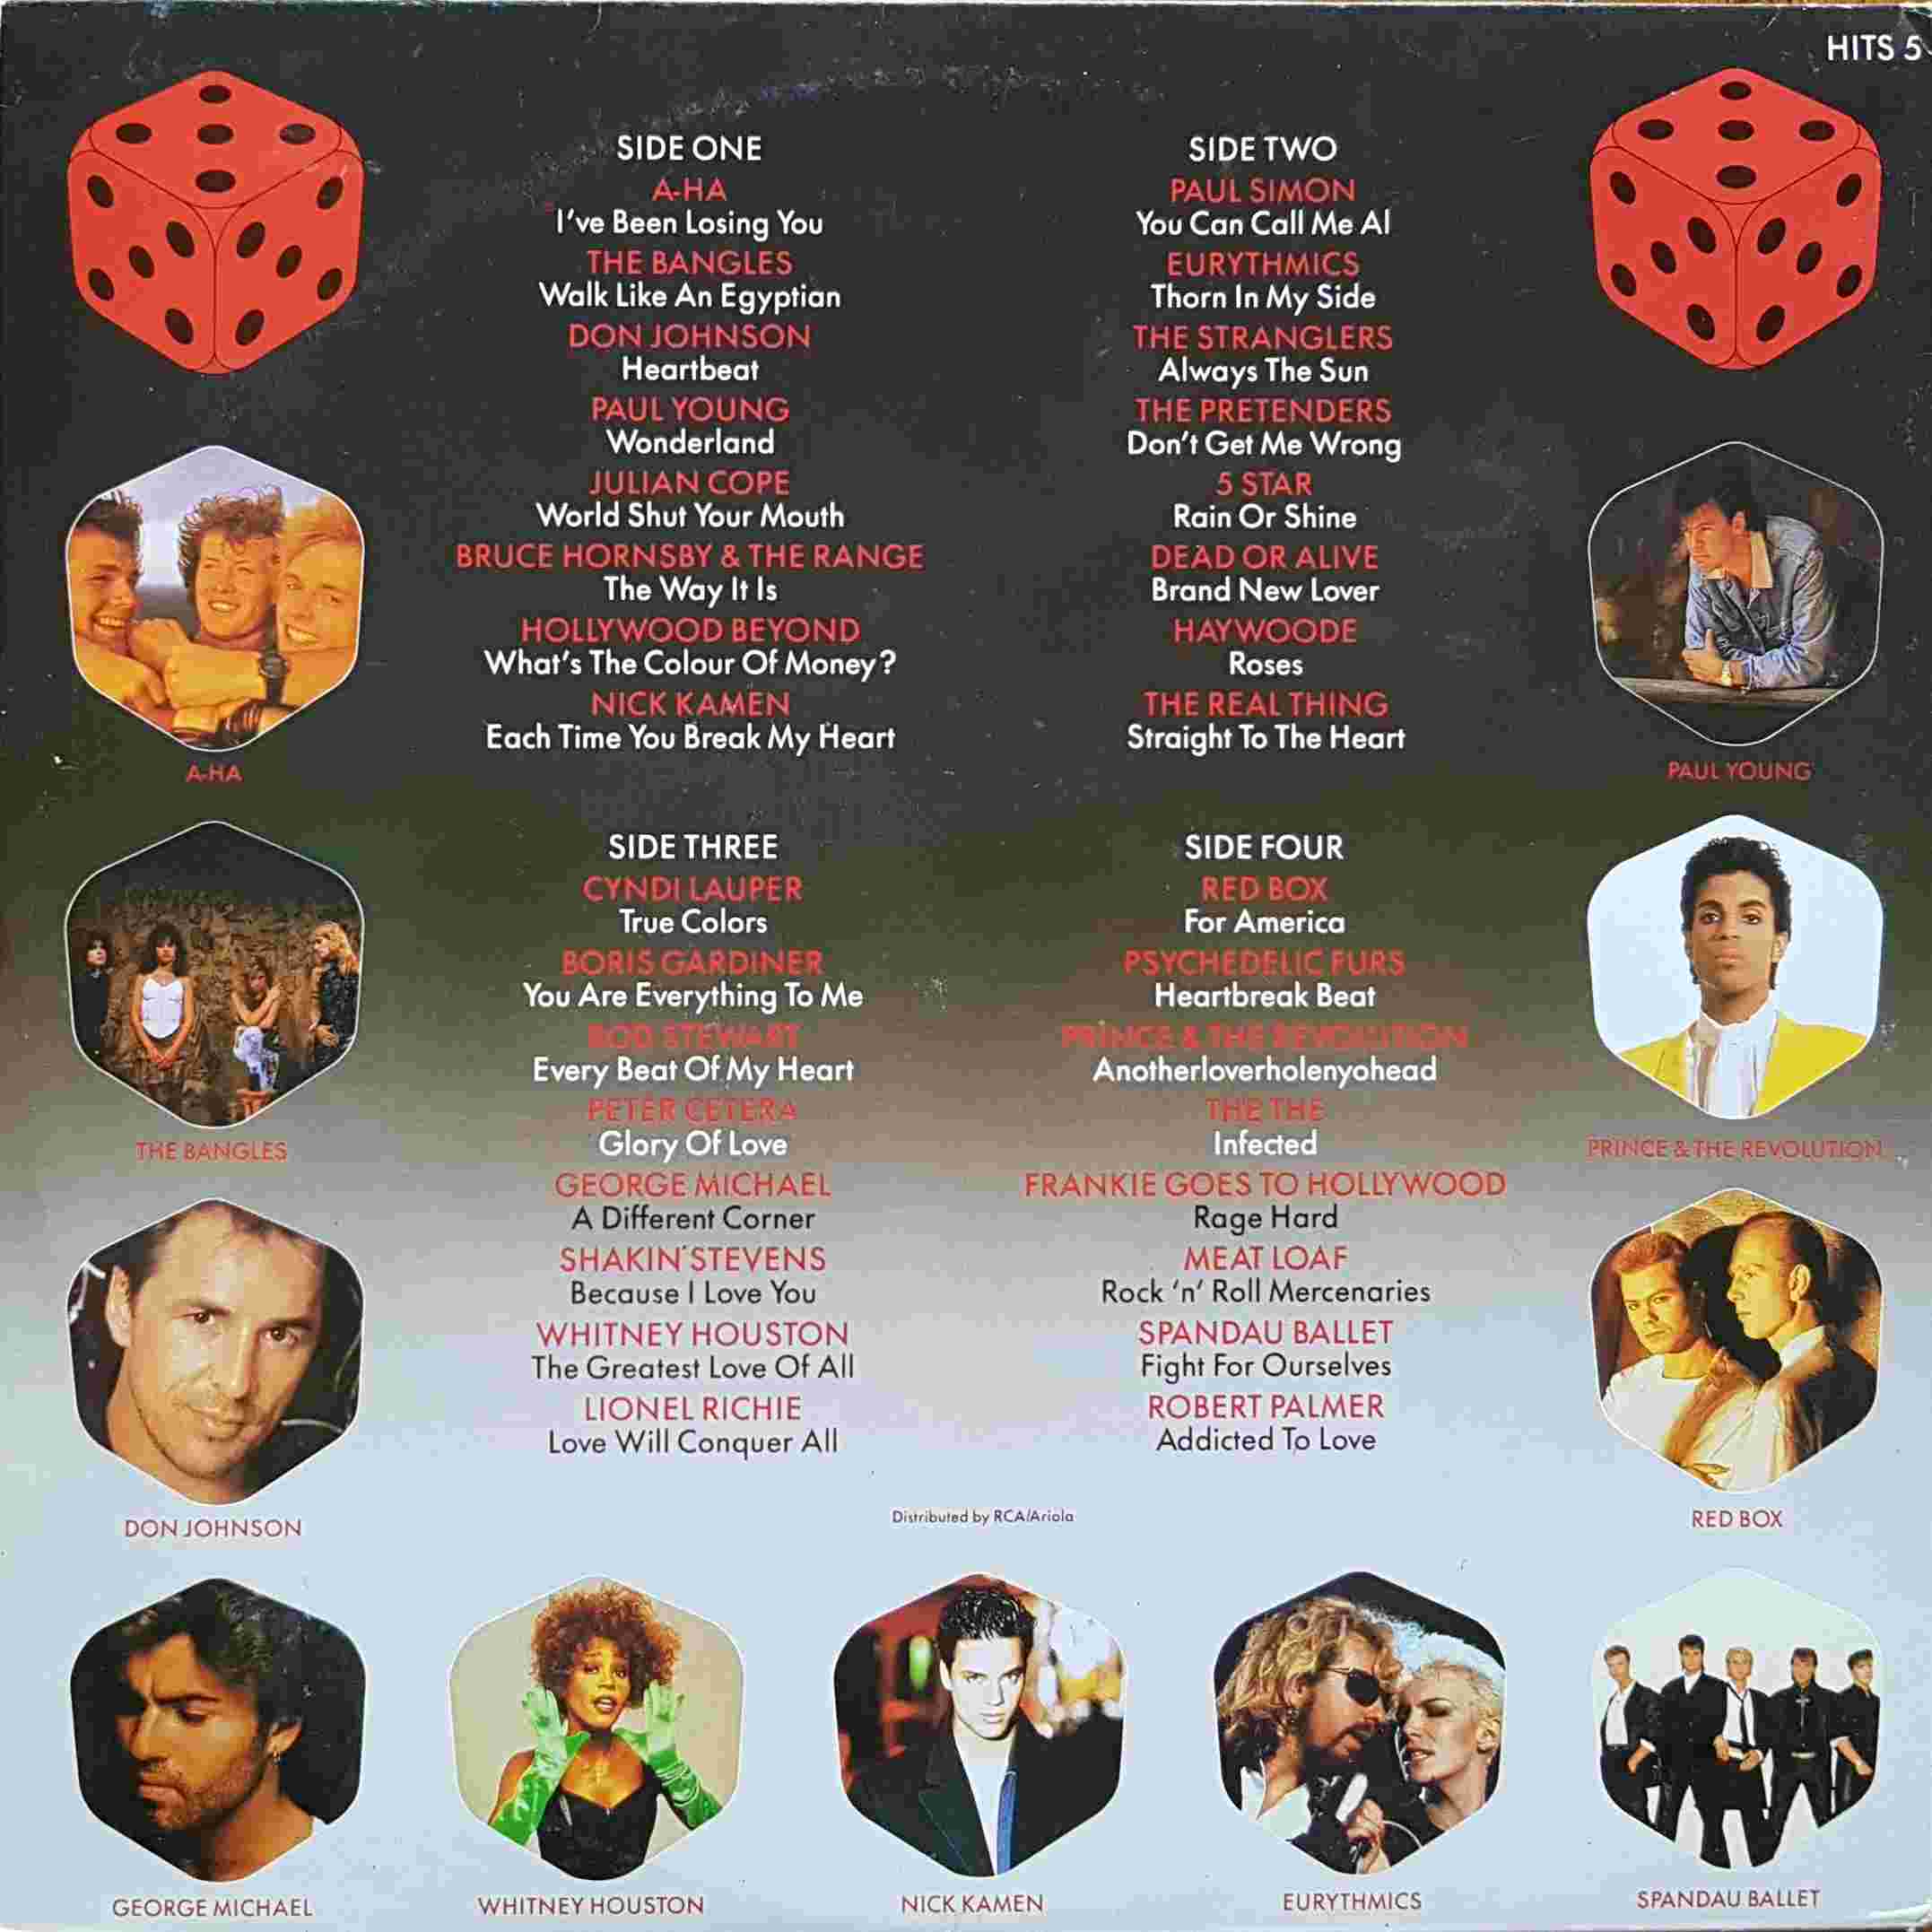 Back cover of HITS 5